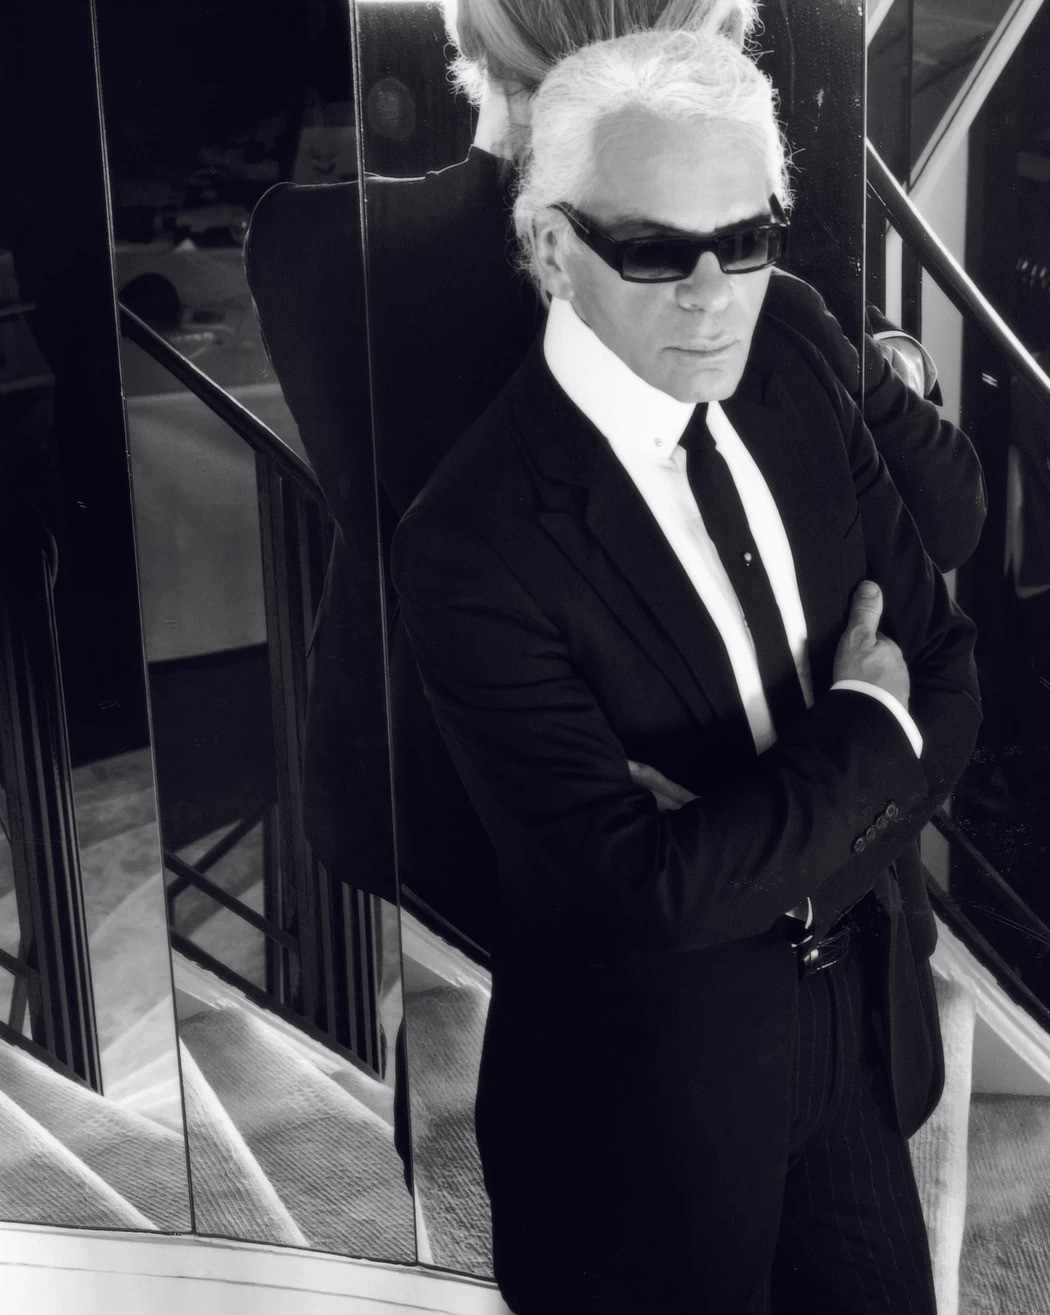 Karl Lagerfeld Had a Famous Work Uniform. Here's How to Make Your Own